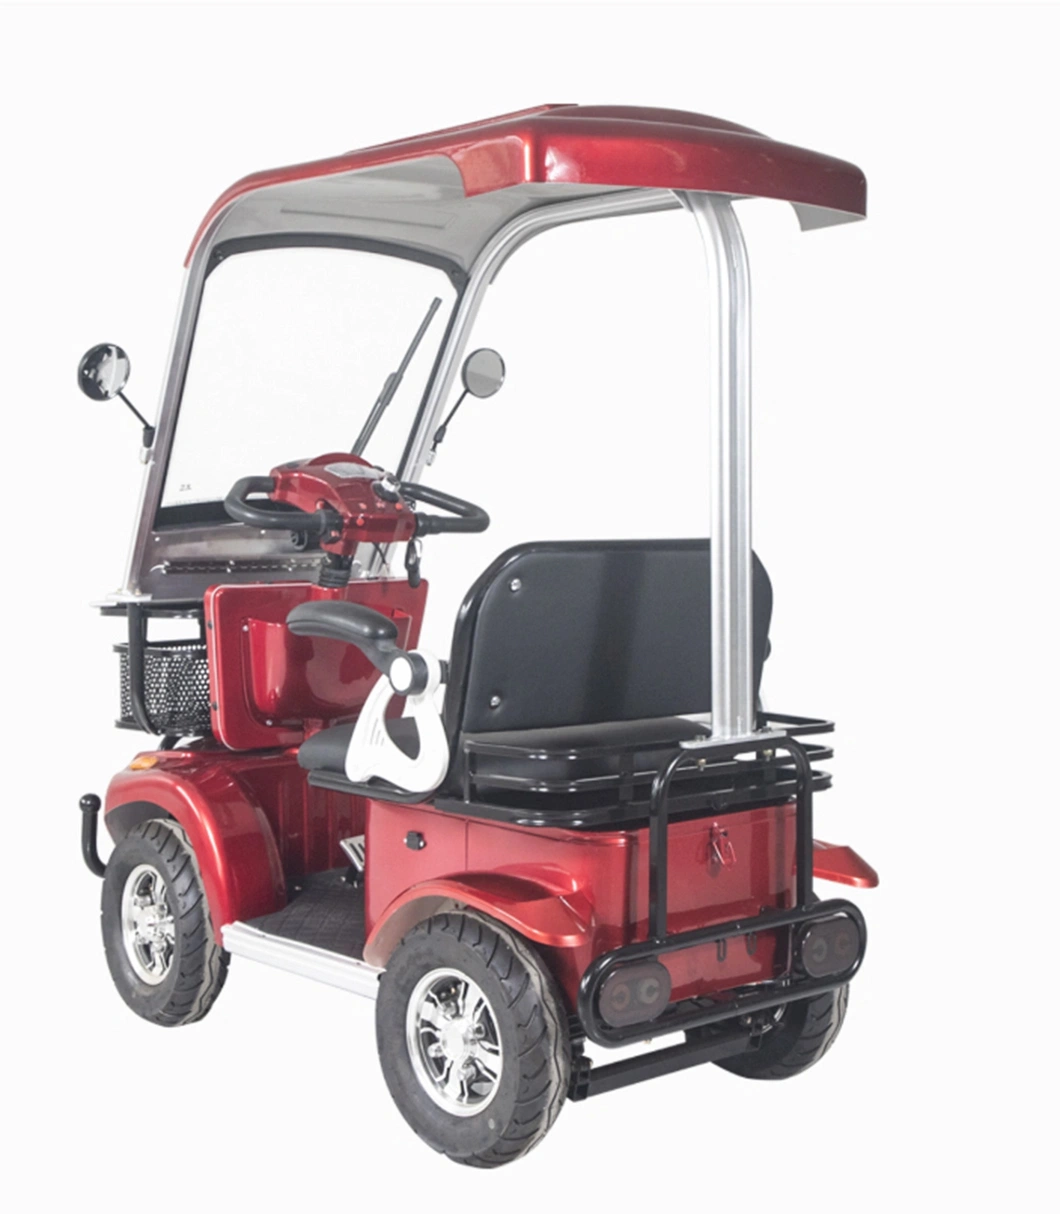 Wholesale of Adult Battery Operated Sightseeing Vehicles for New Four-Wheel Electric Vehicles